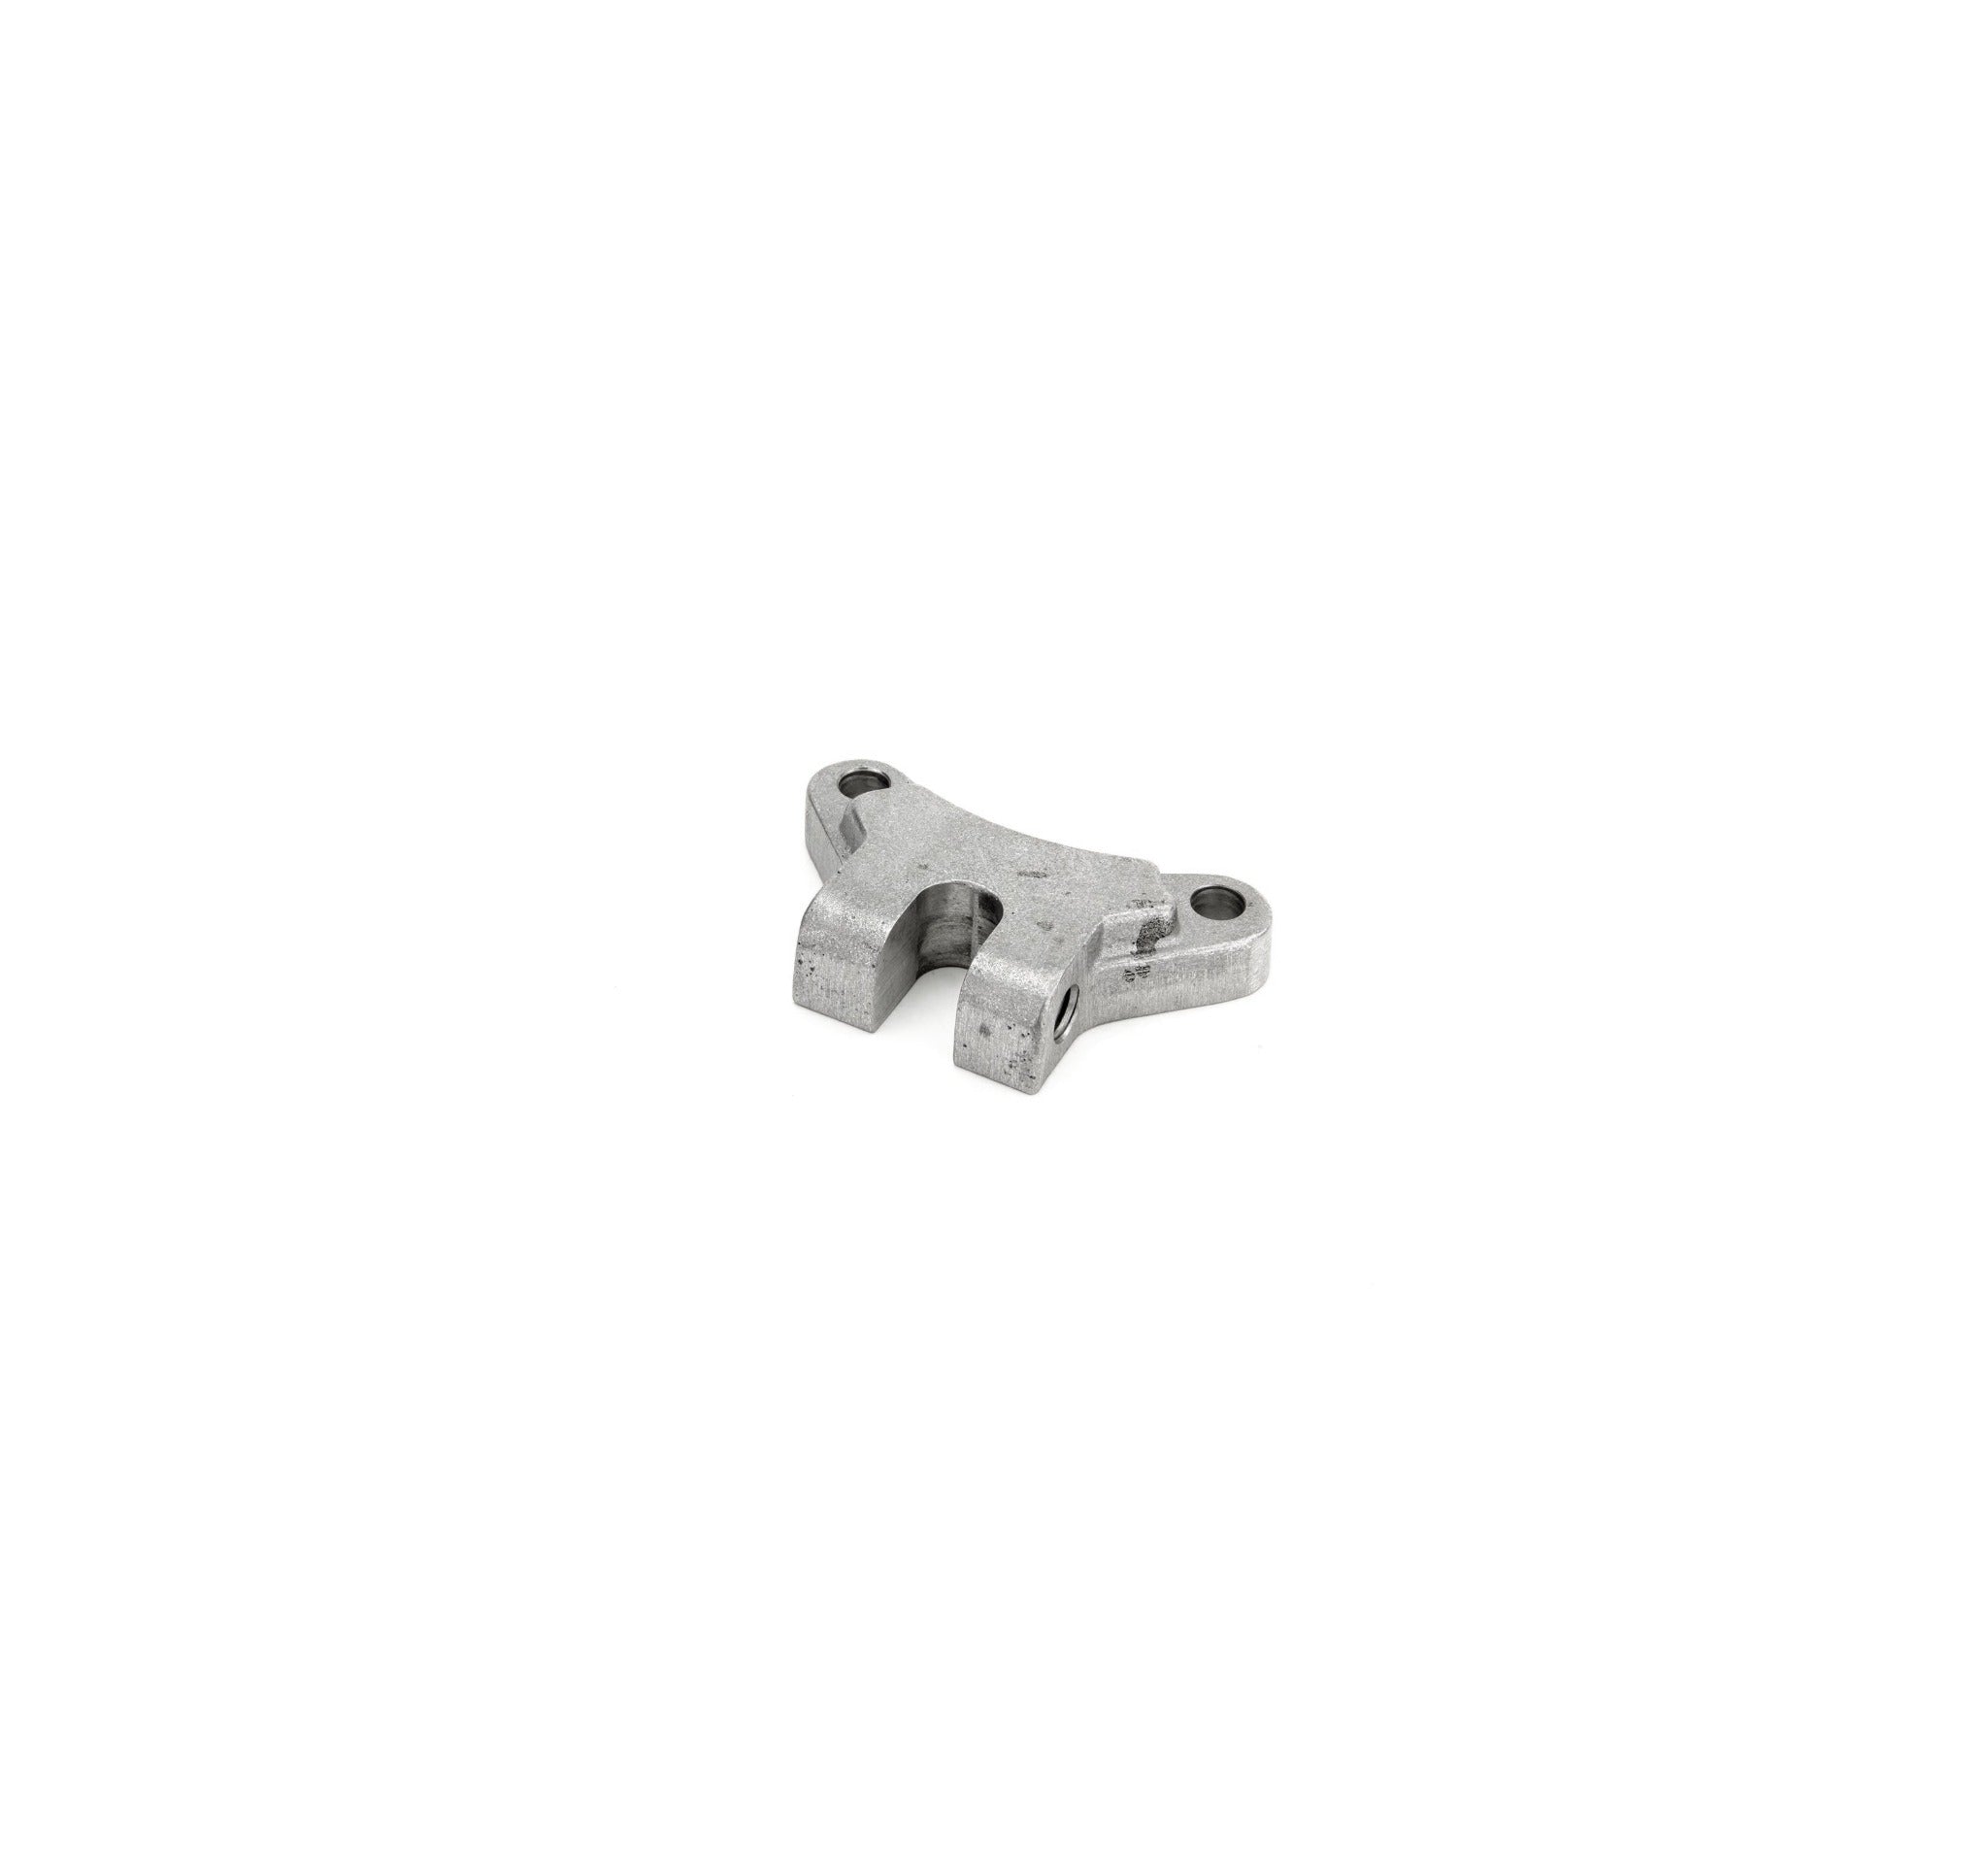 Rear Clamp spindle lock for Ammco